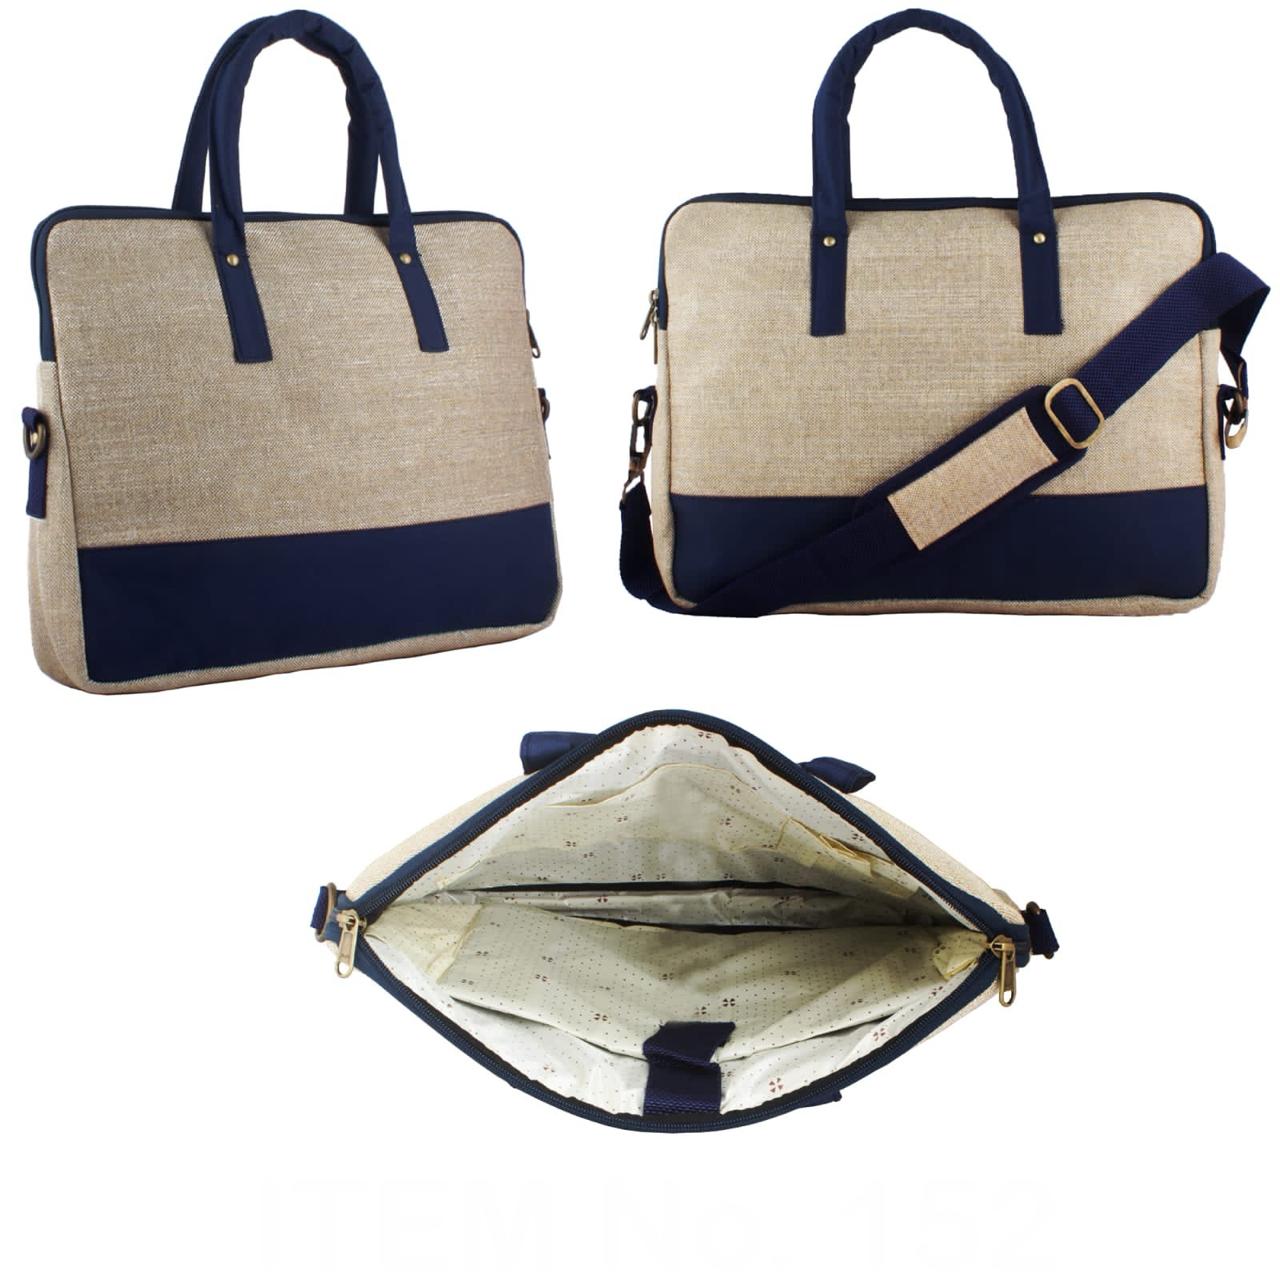 Corporate Designer Bags To Store Laptops Documents Carry Style By Tamrapatra